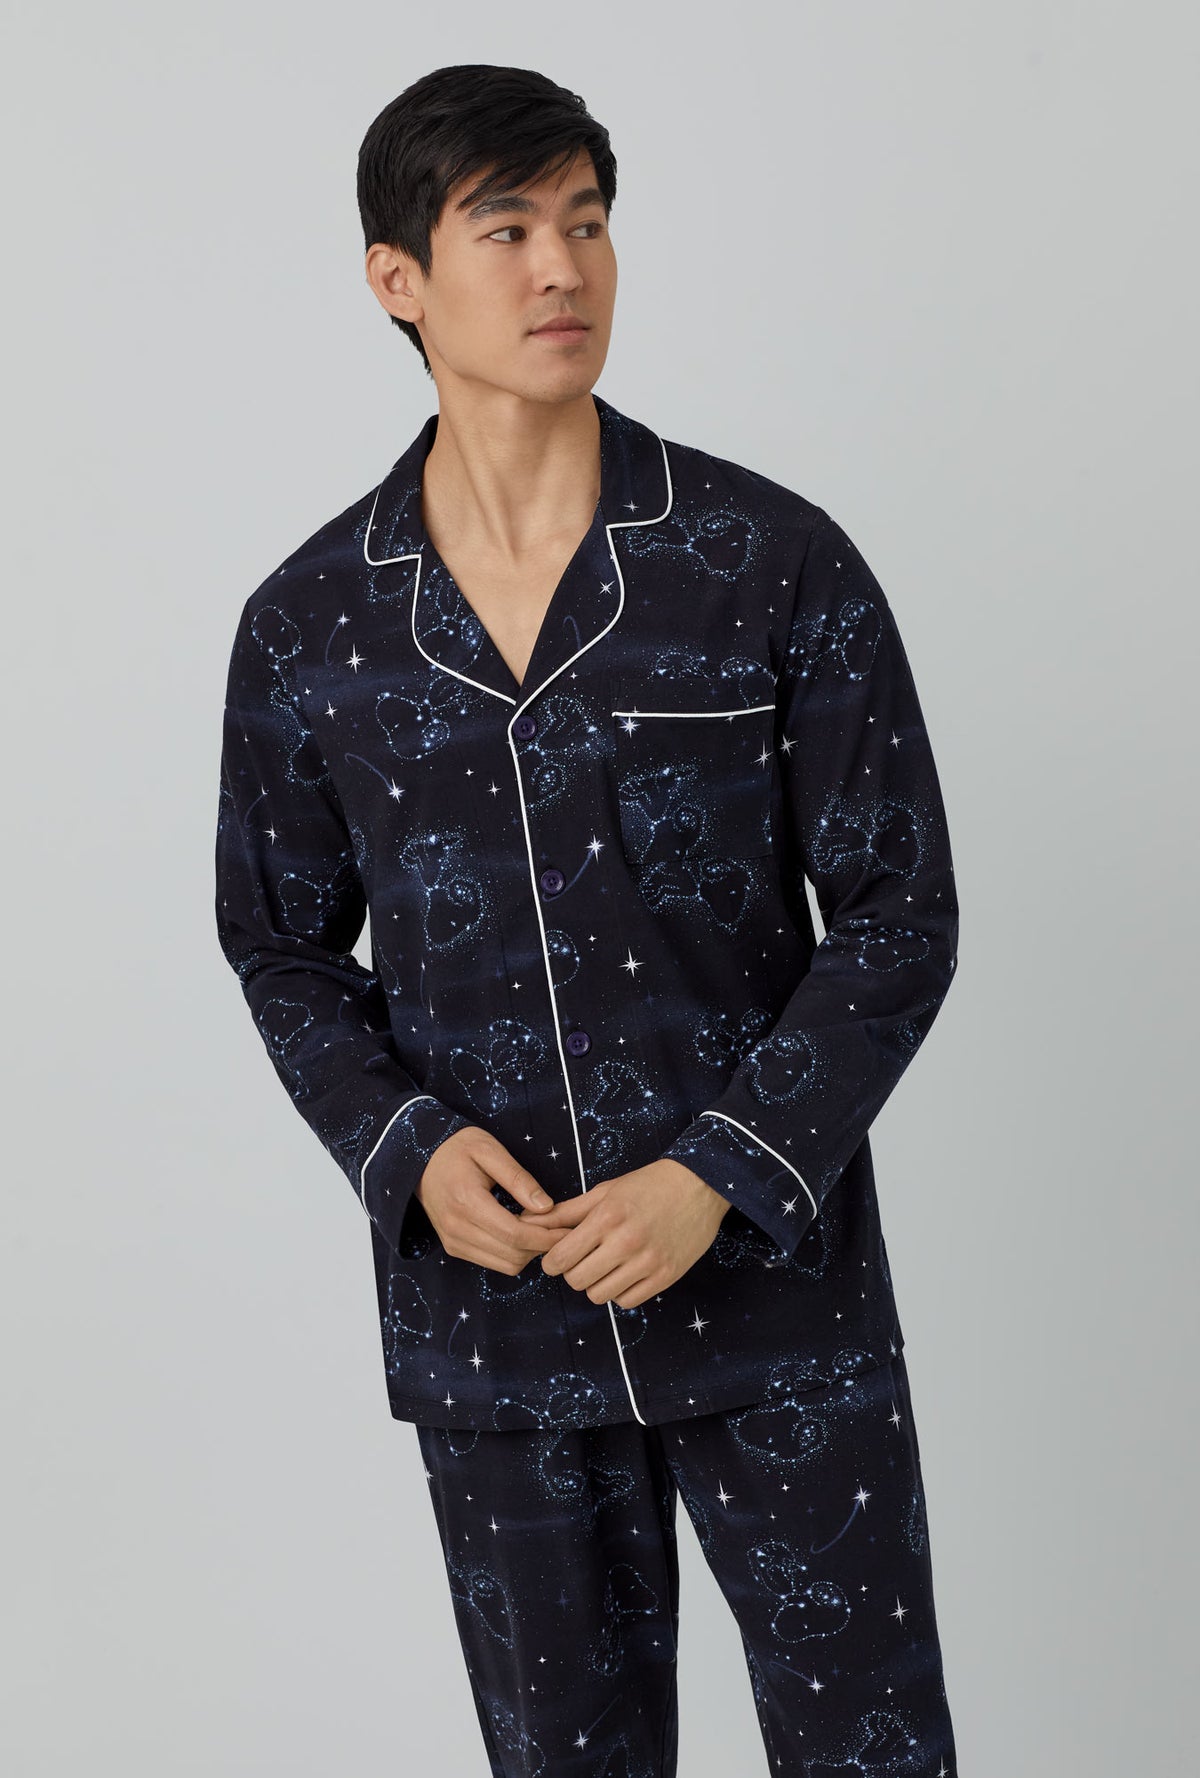 A men wearing black  Long Sleeve Classic Stretch Jersey PJ Set with Celestial Snoopy  print